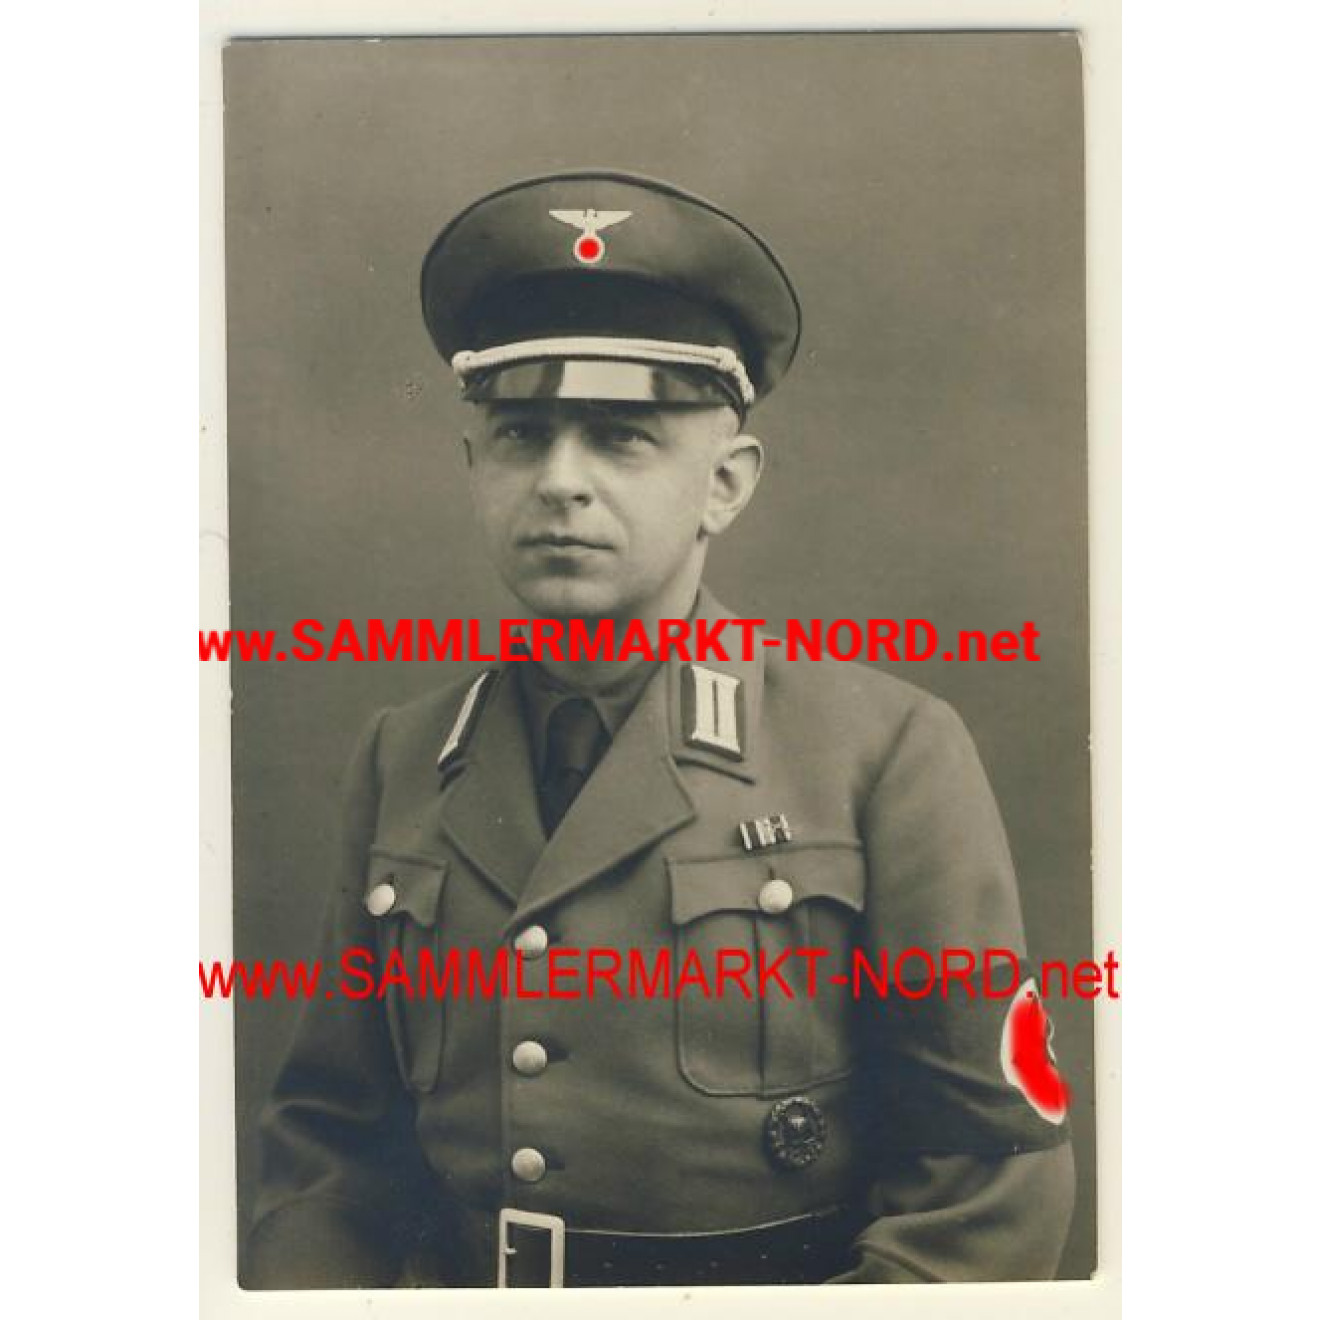 Political leader of the NSDAP